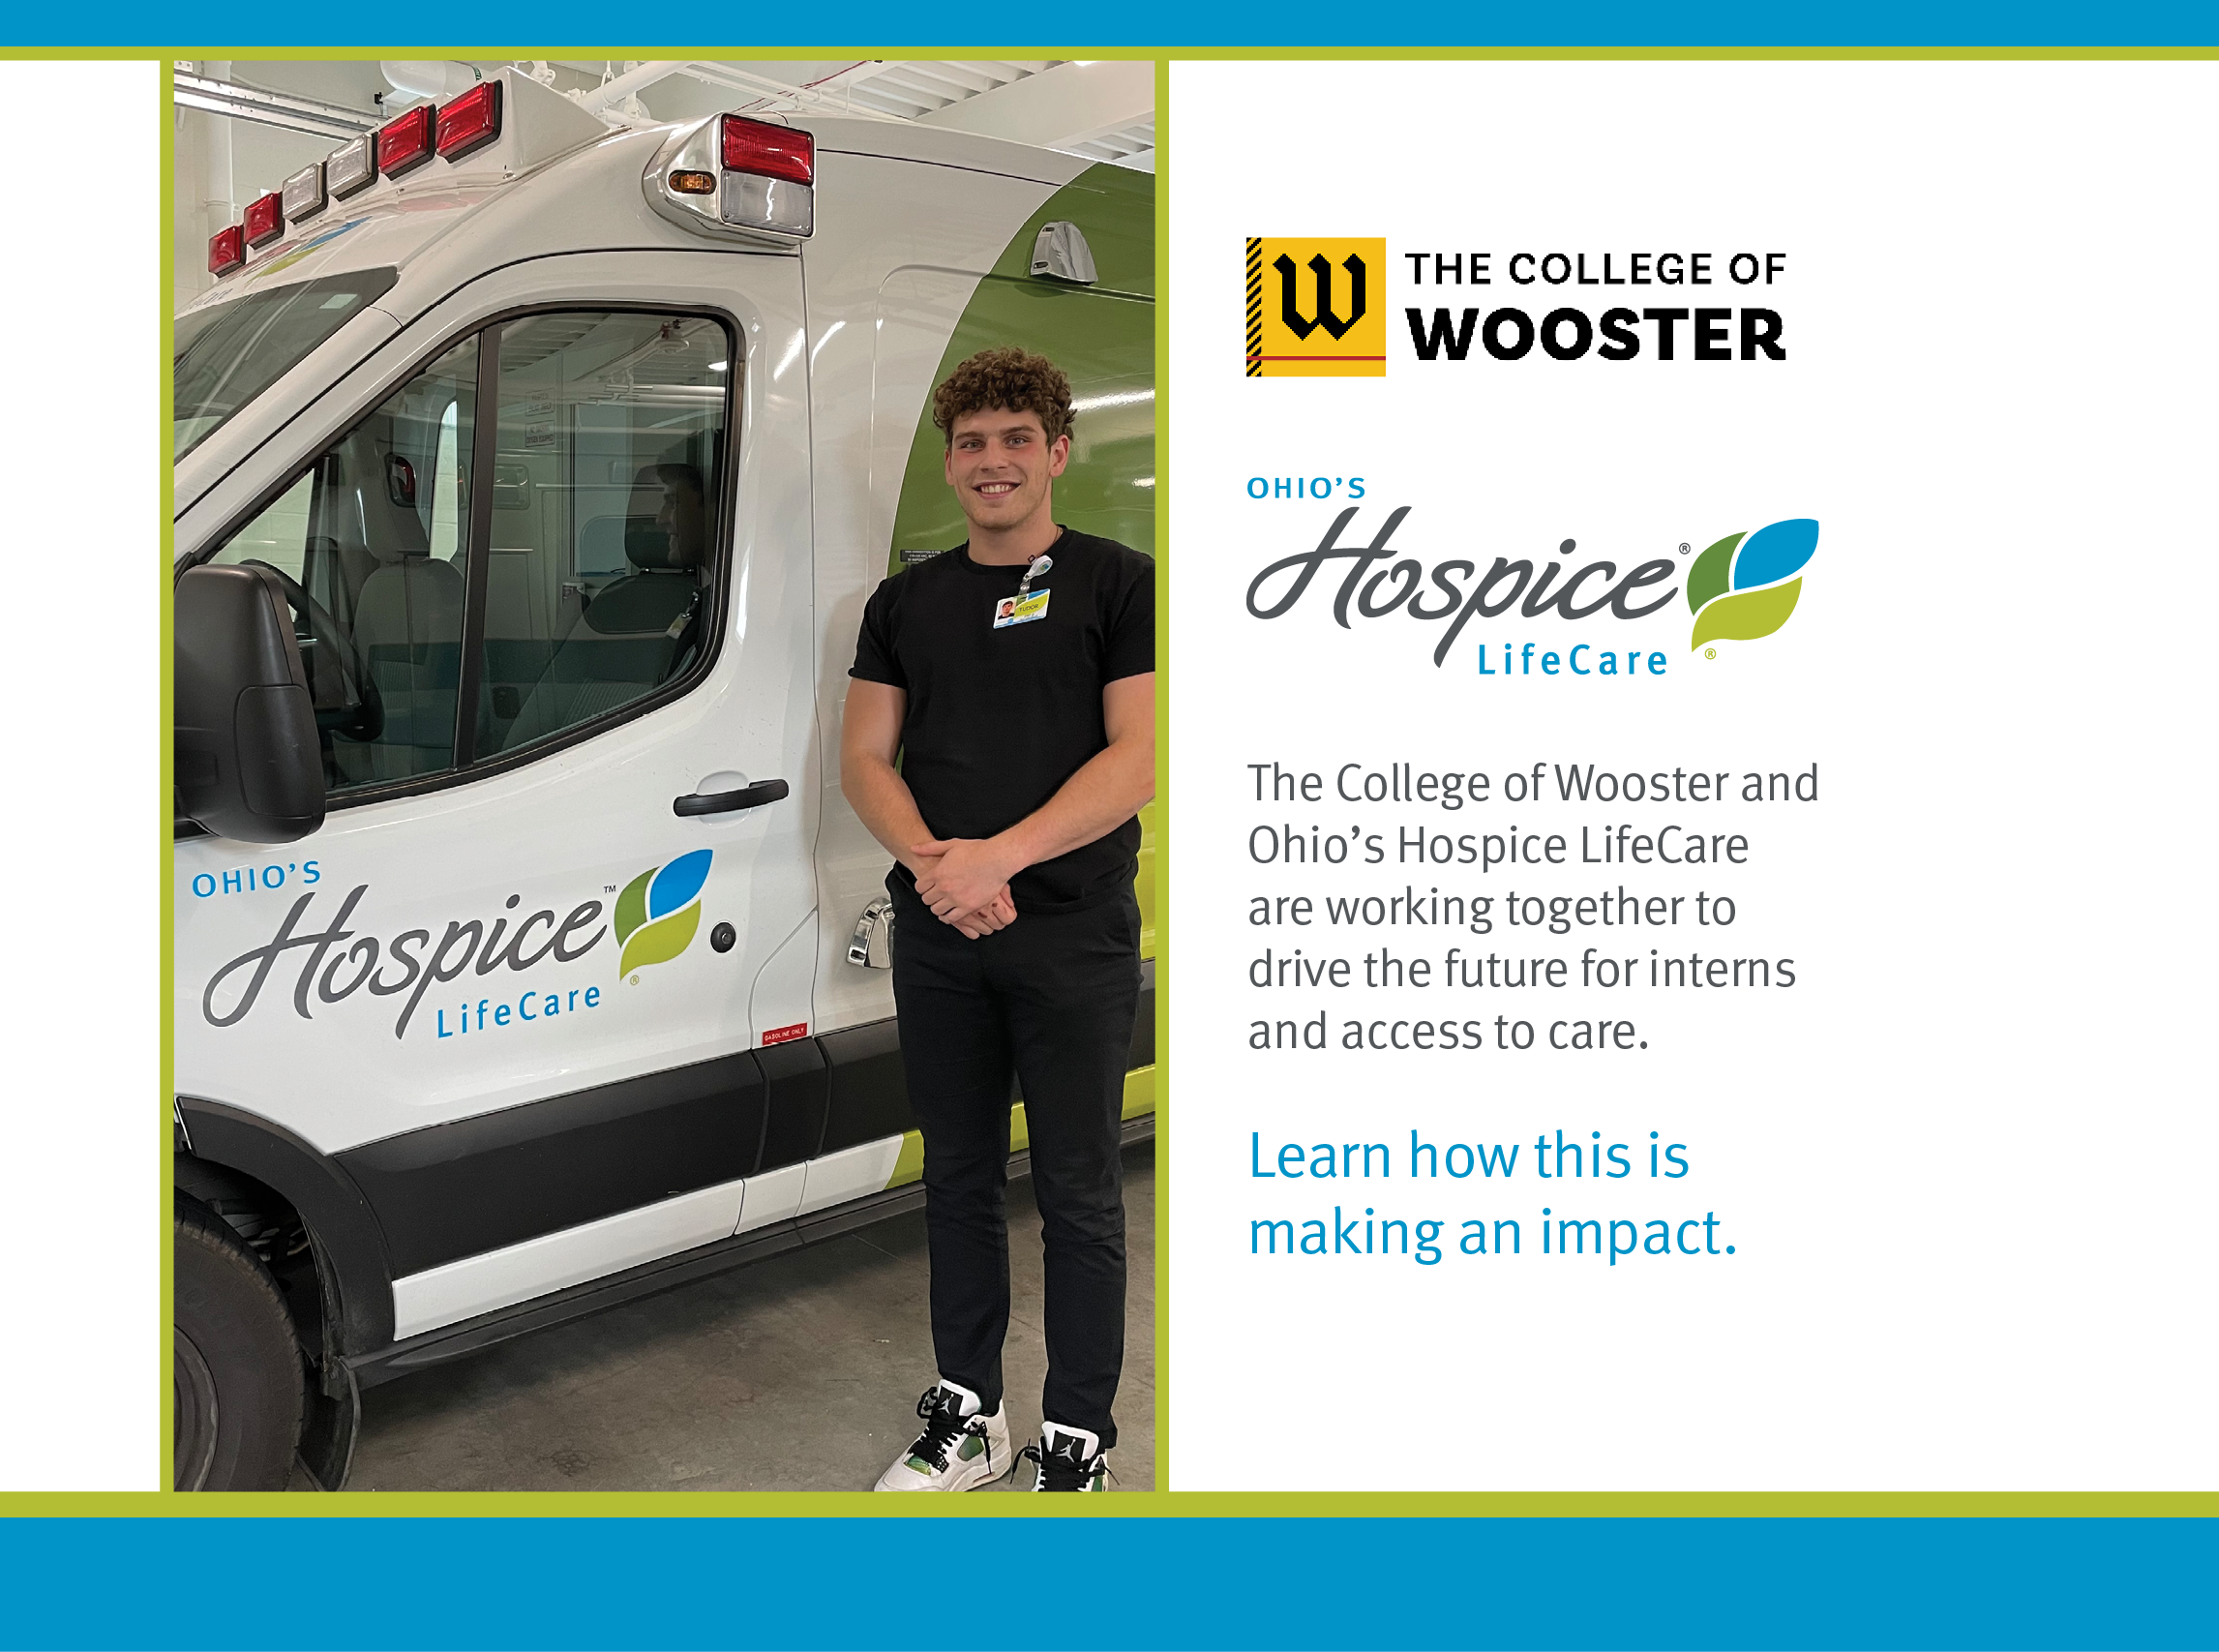 The Colleg of Wooster and Ohio's Hospice LifeCare are working together to drive the future for interns and access to care. Learn how this is making an impact.